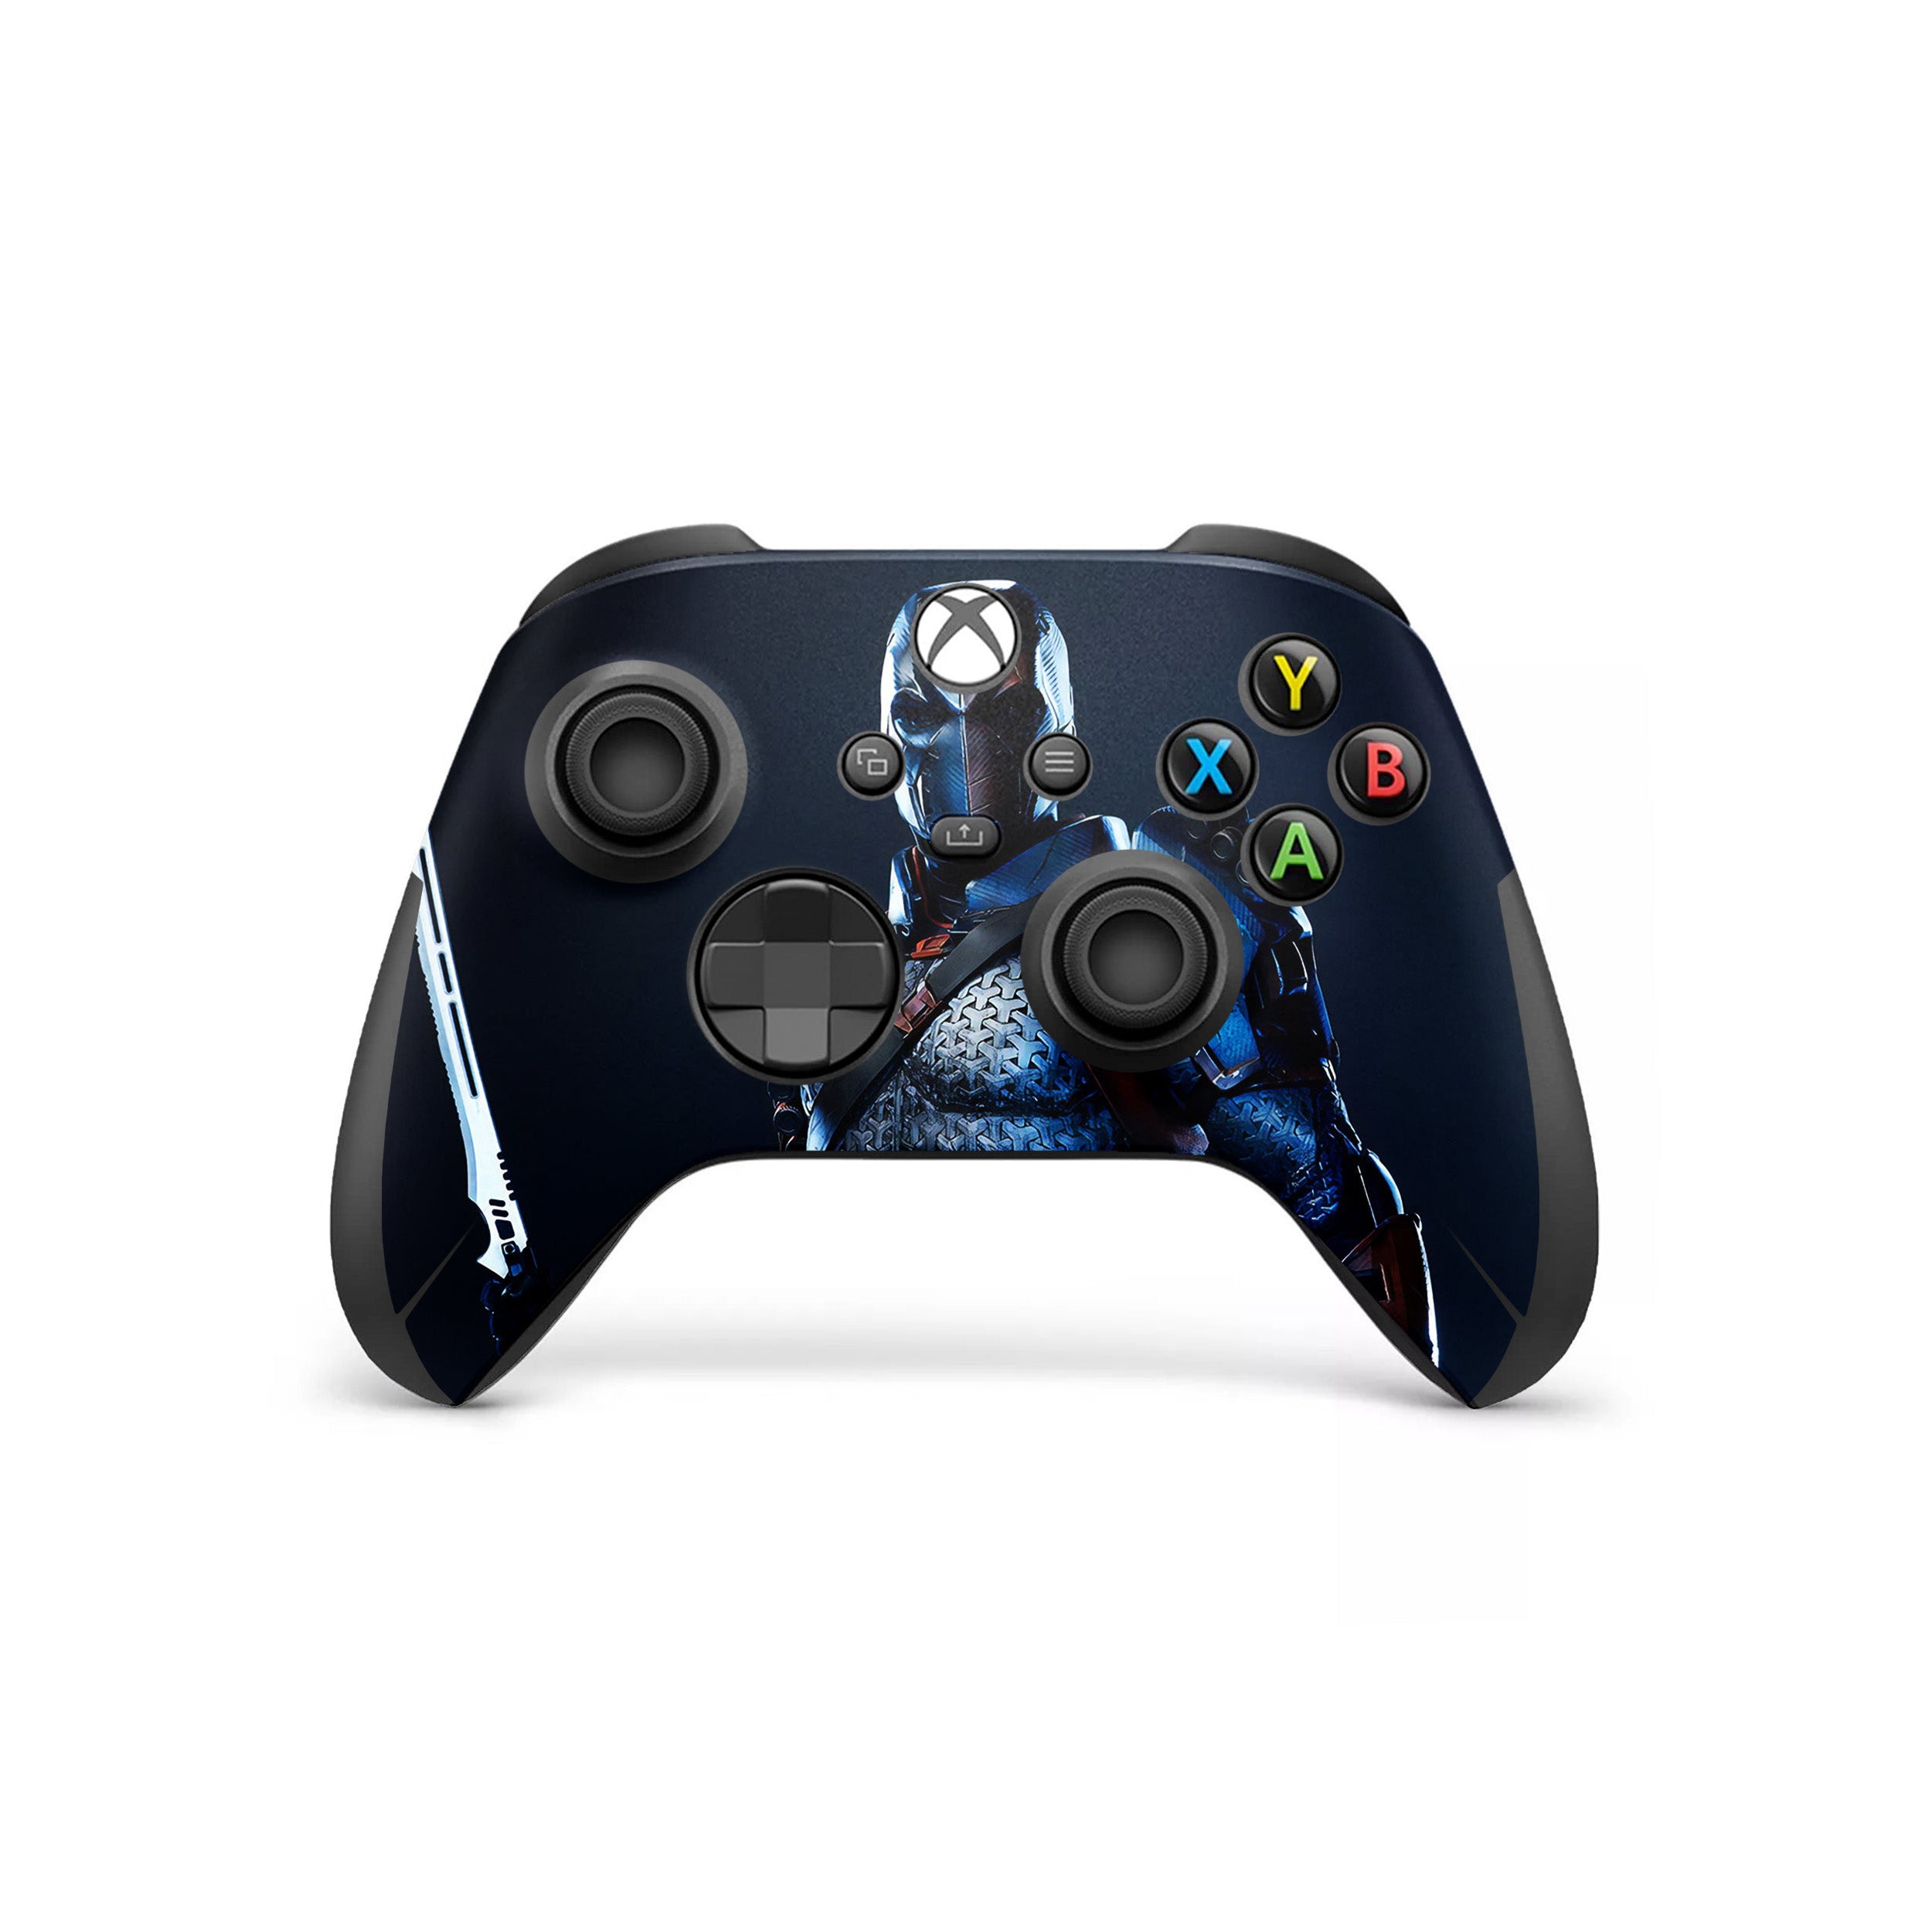 A video game skin featuring a DC Comics Deathstroke design for the Xbox Wireless Controller.